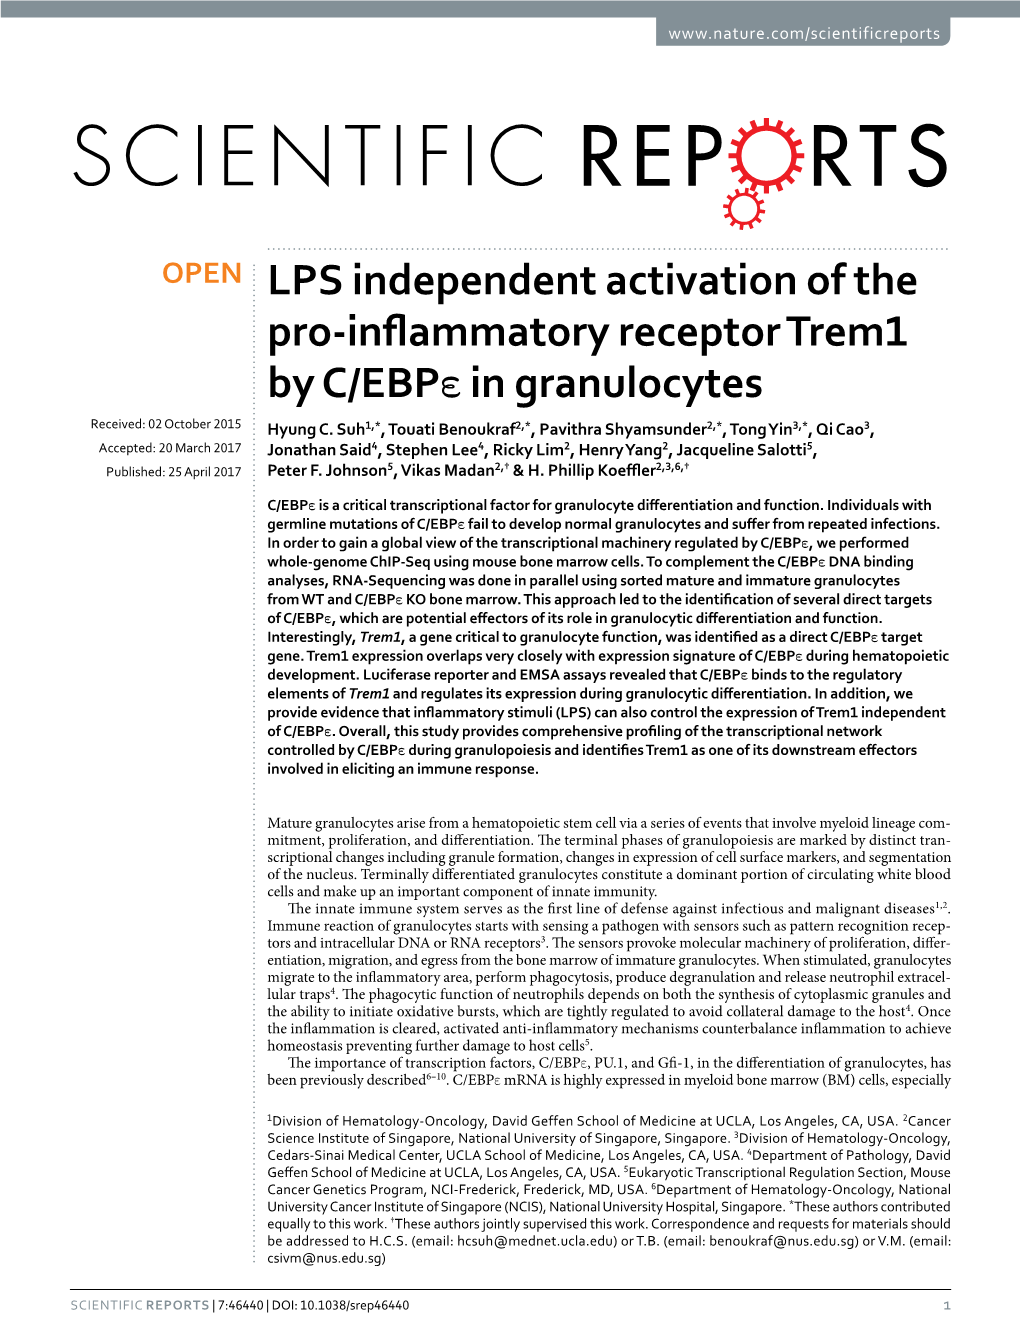 LPS Independent Activation of the Pro-Inflammatory Receptor Trem1 by C/Ebpε in Granulocytes Received: 02 October 2015 Hyung C